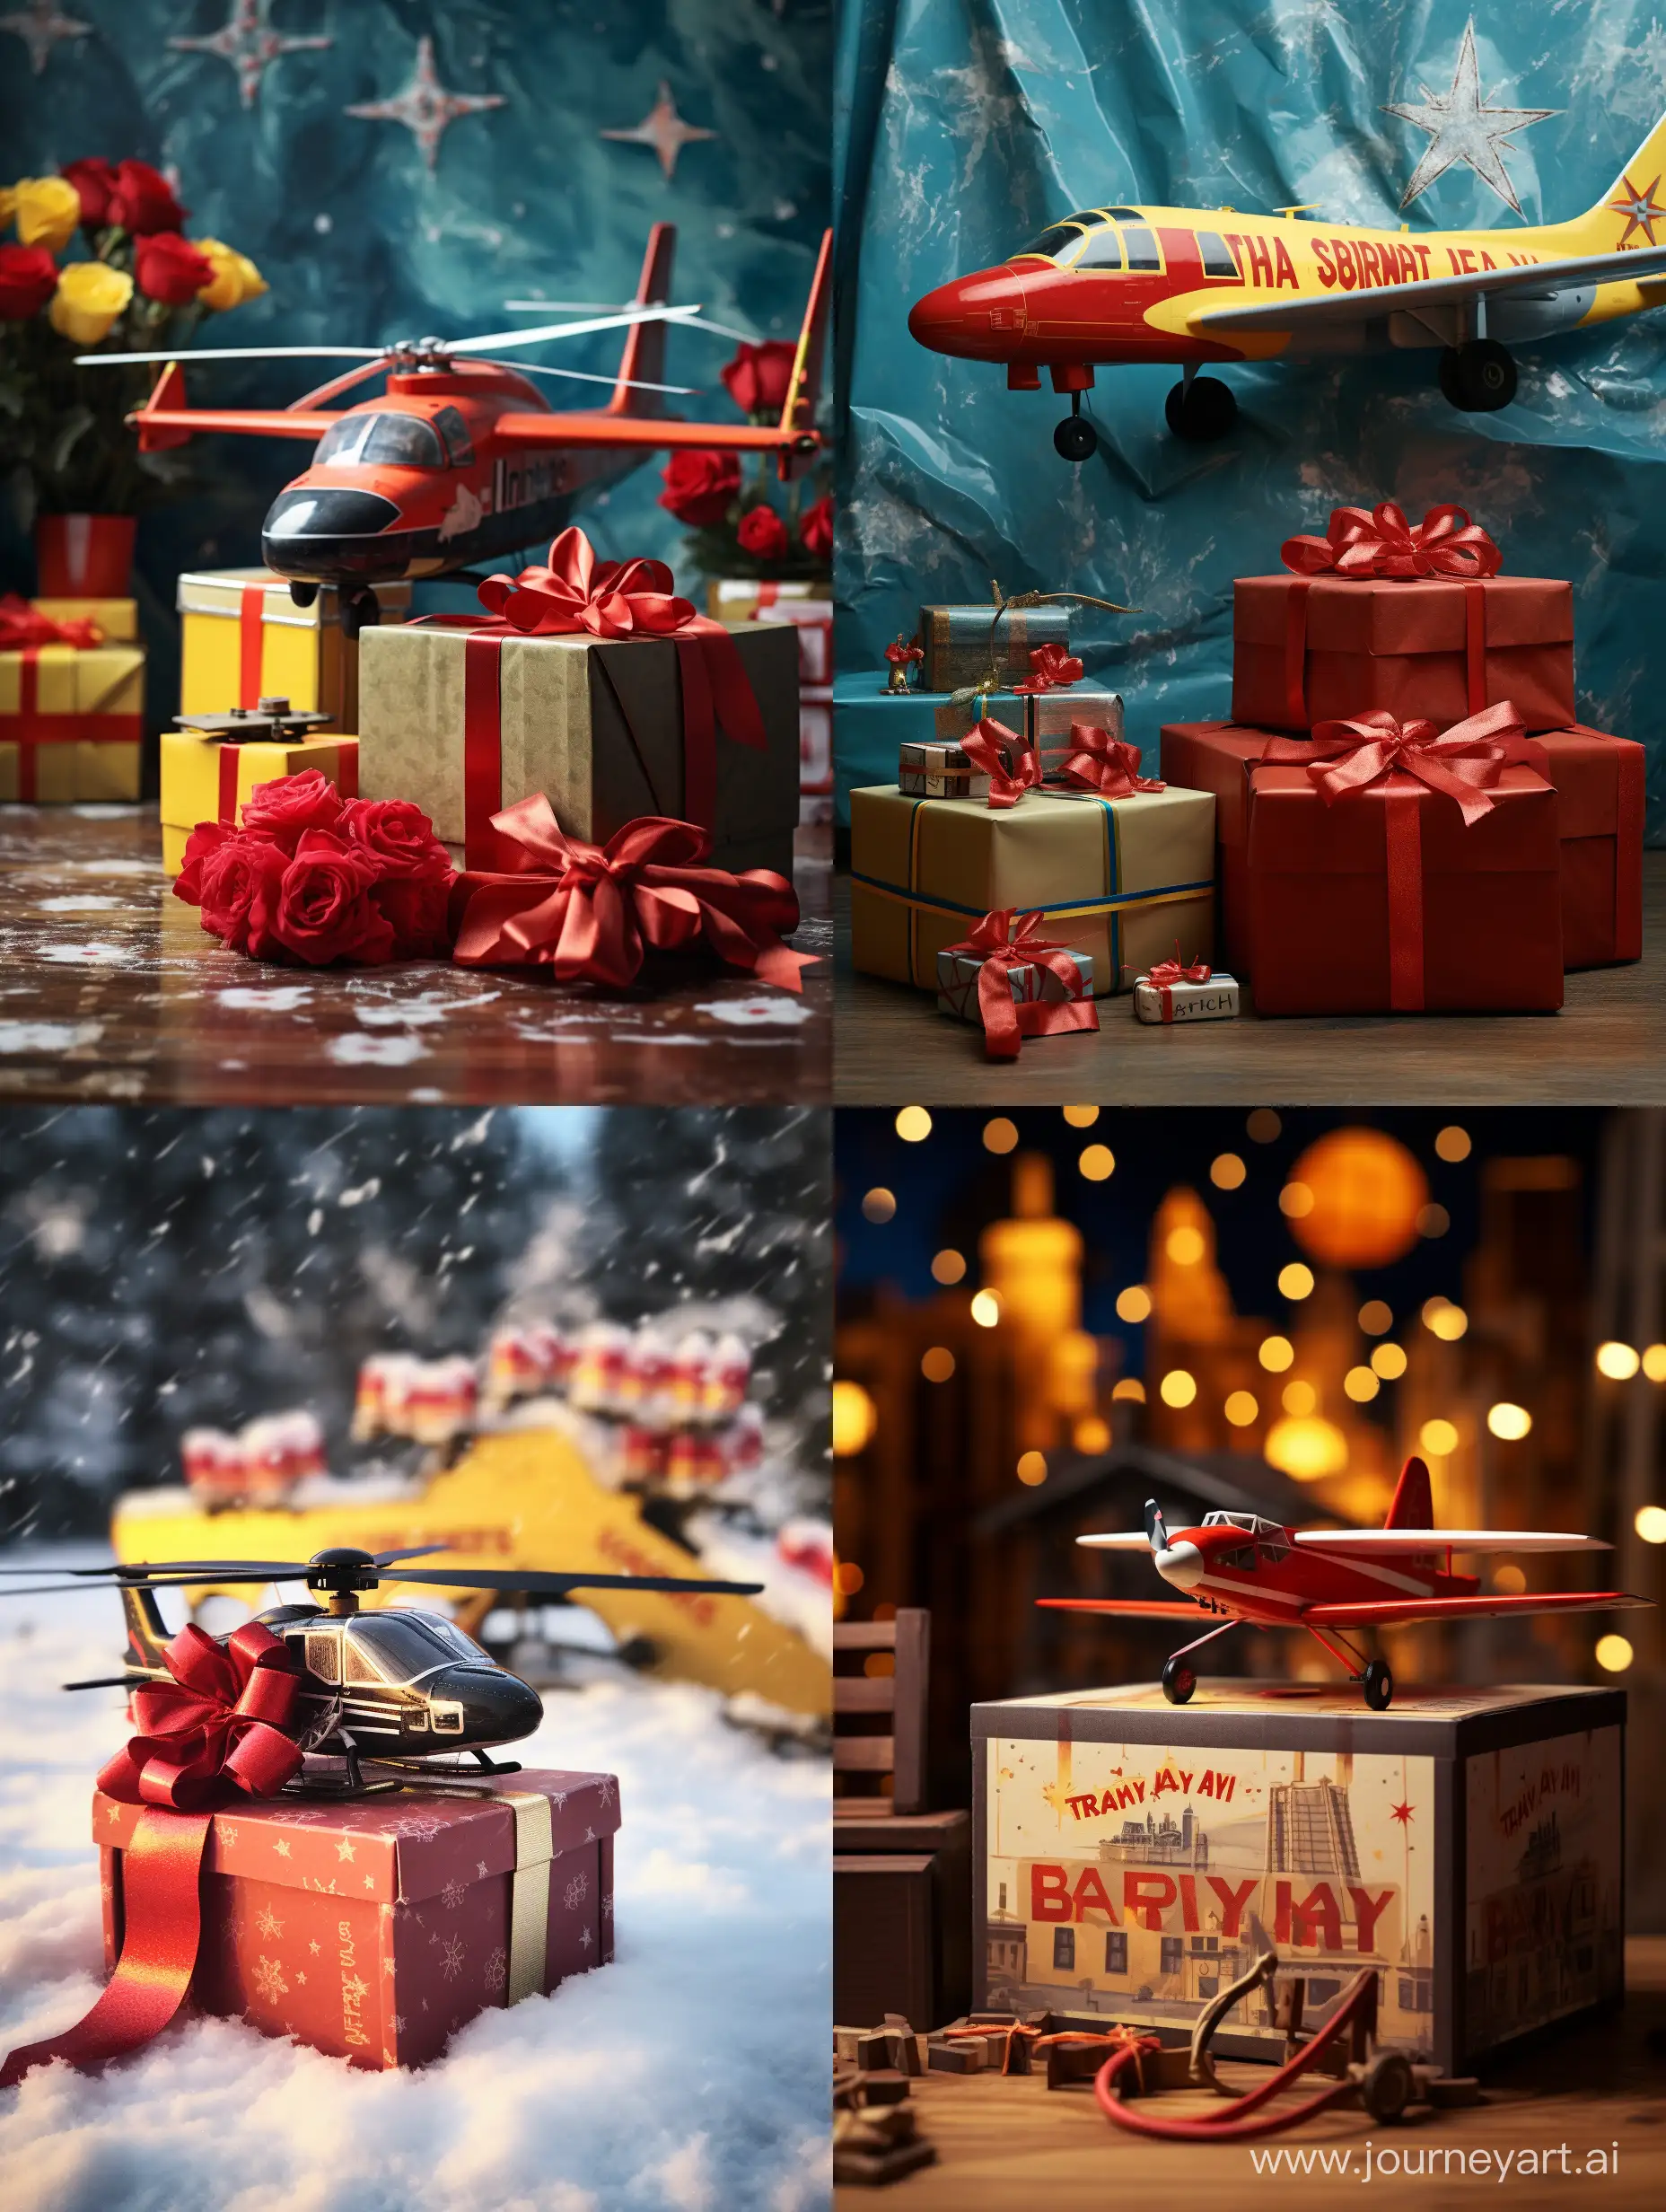 A bright New Year's background, on this background there is a box of a "1/48 scale model of a Soviet aircraft", the box is tied with a red bow. There is an inscription "happy new year" under the box on the main background.